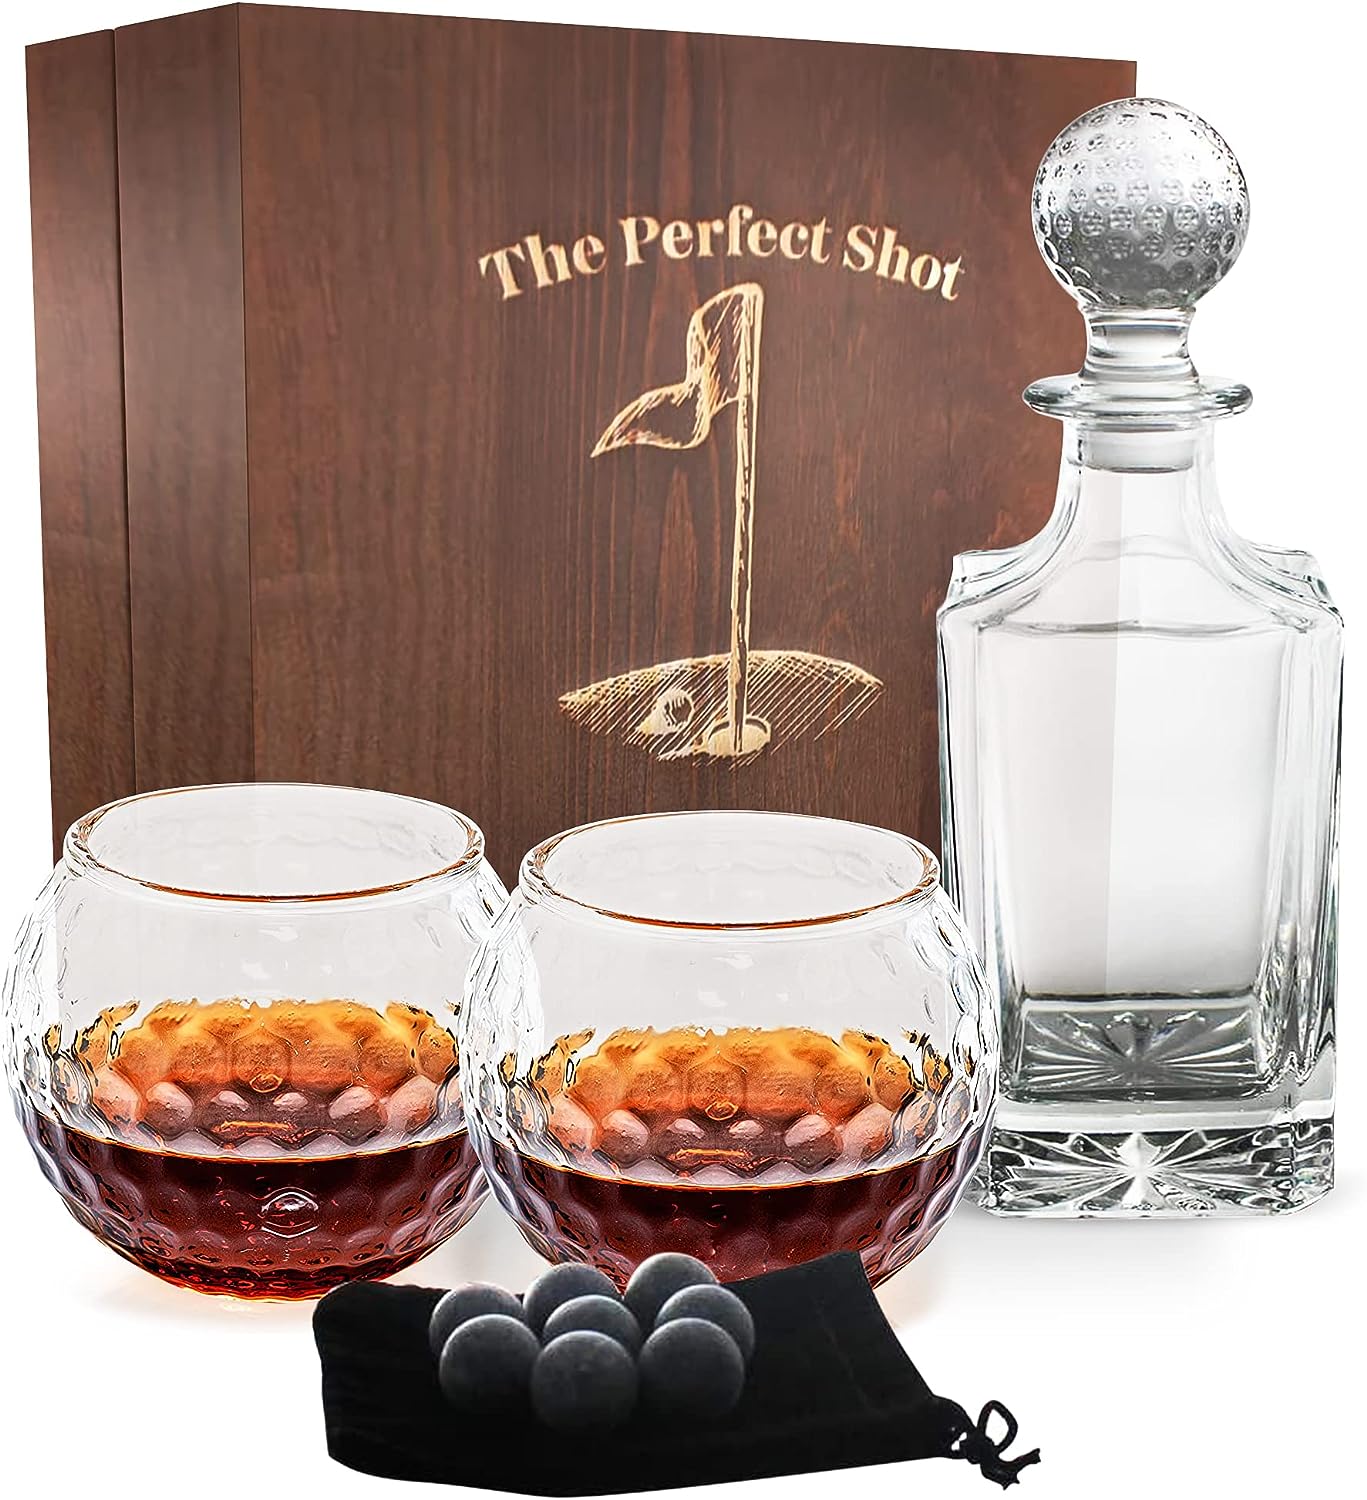 Golf Ball Whiskey Glass and Decanter Set by The Perfect Shot Whiskey Co. | Perfect Golf Gift Decanter Gift Set | Decanter, 2 Golf Ball Whiskey Glass, 8 Whiskey Stones and Gift Box